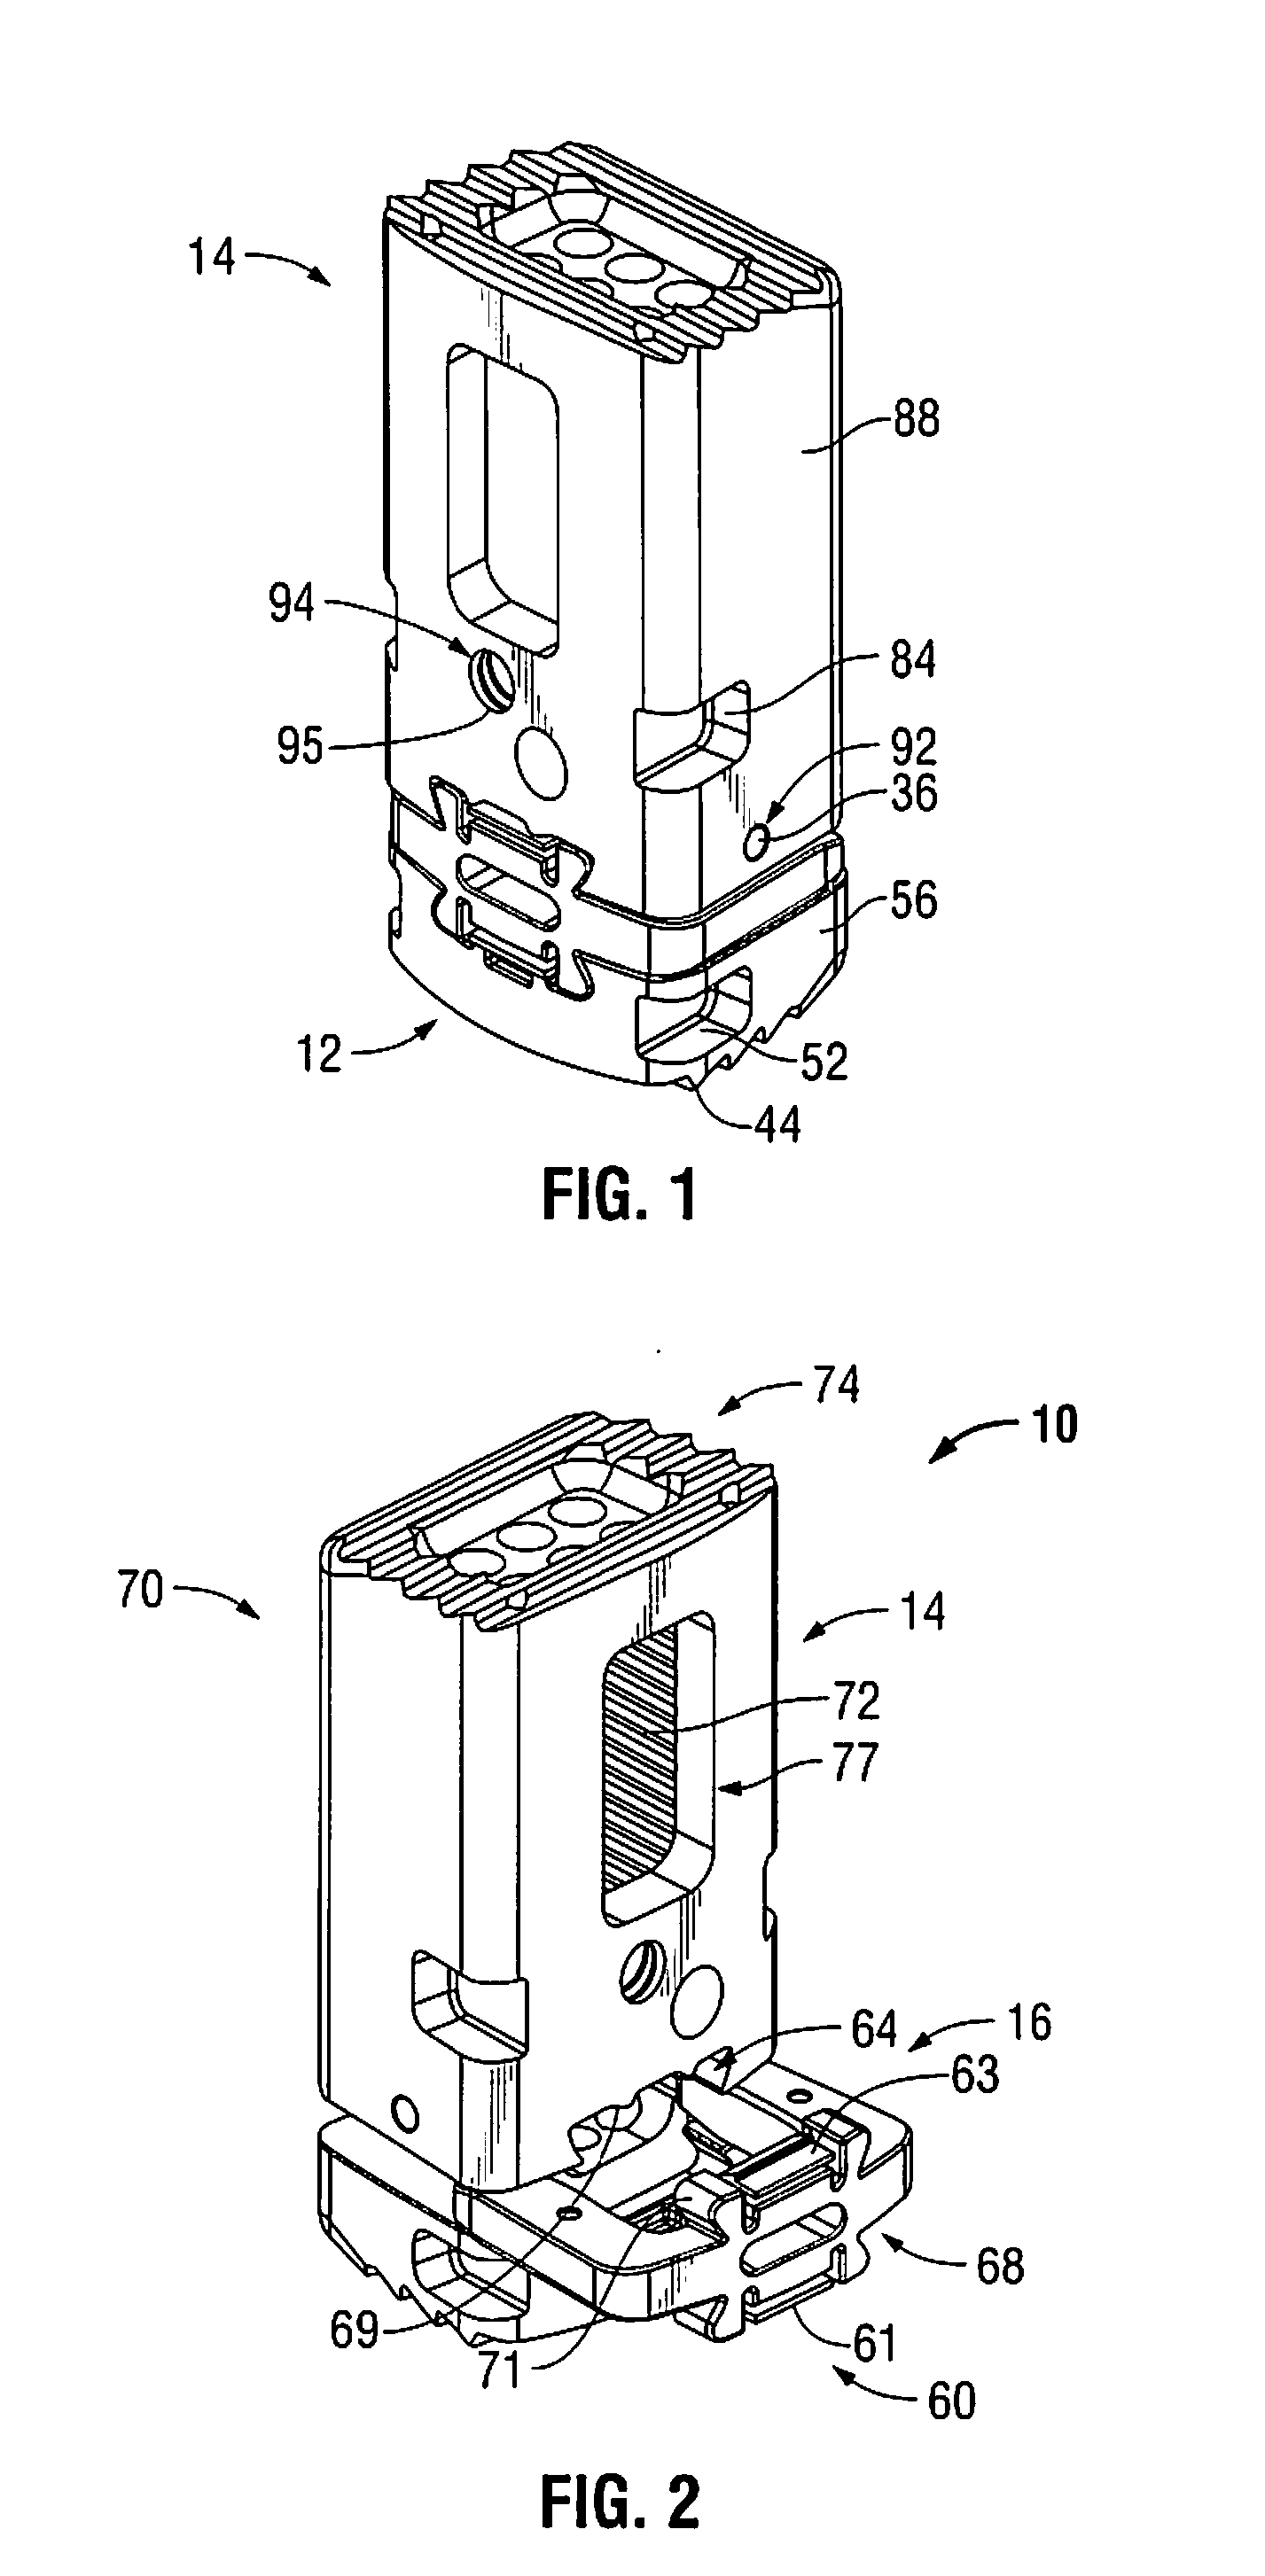 Expandable cage